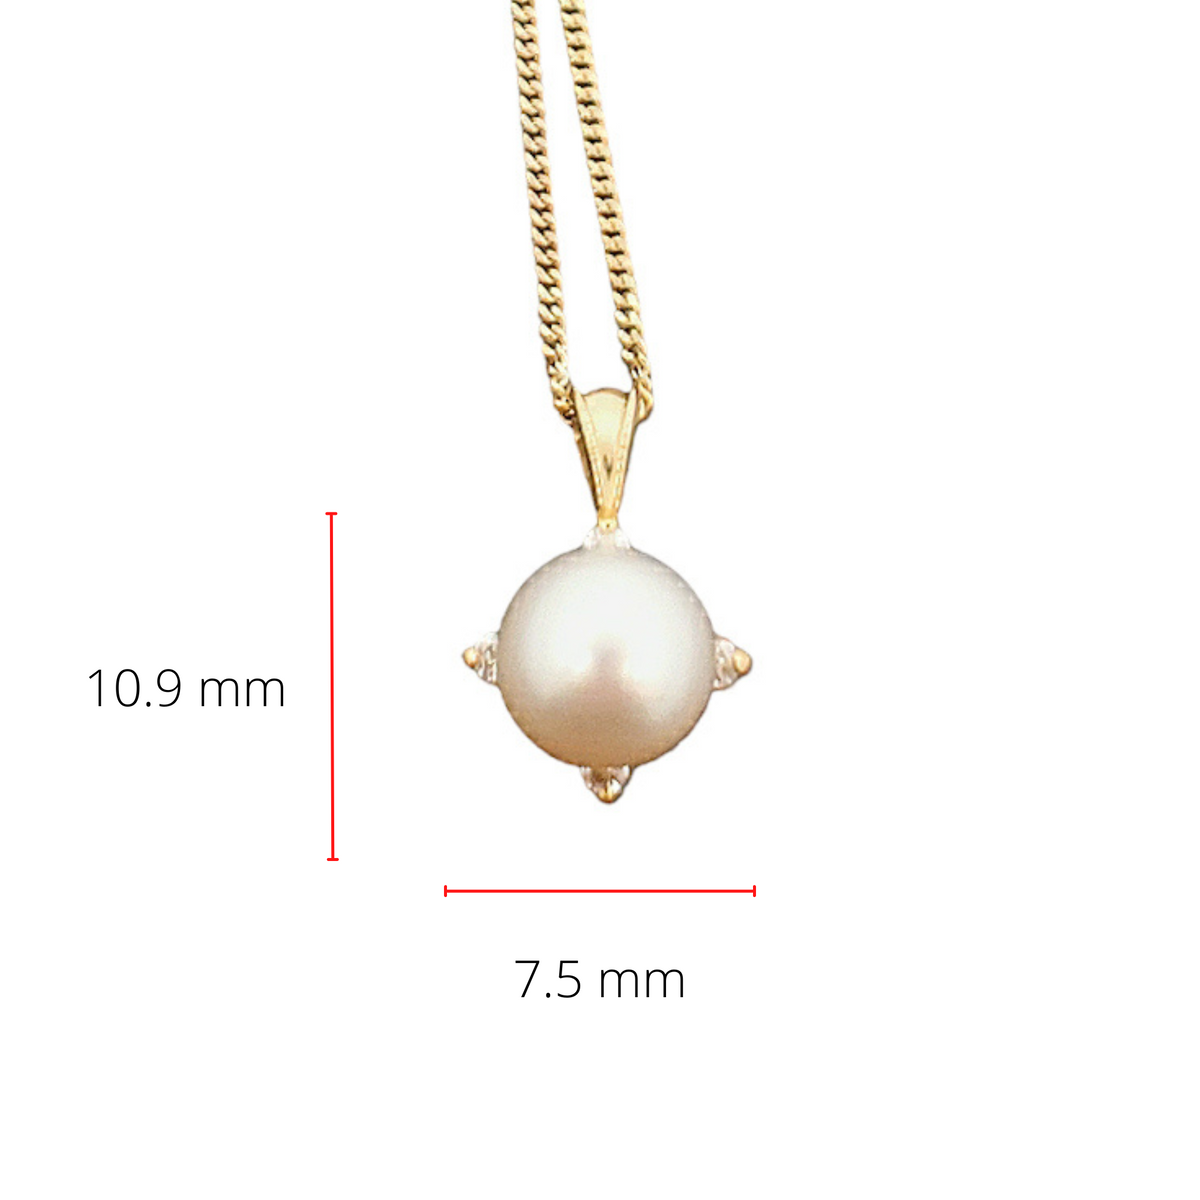 10K Yellow Gold Cultured Pearl and Diamond Pendant - 18&quot;